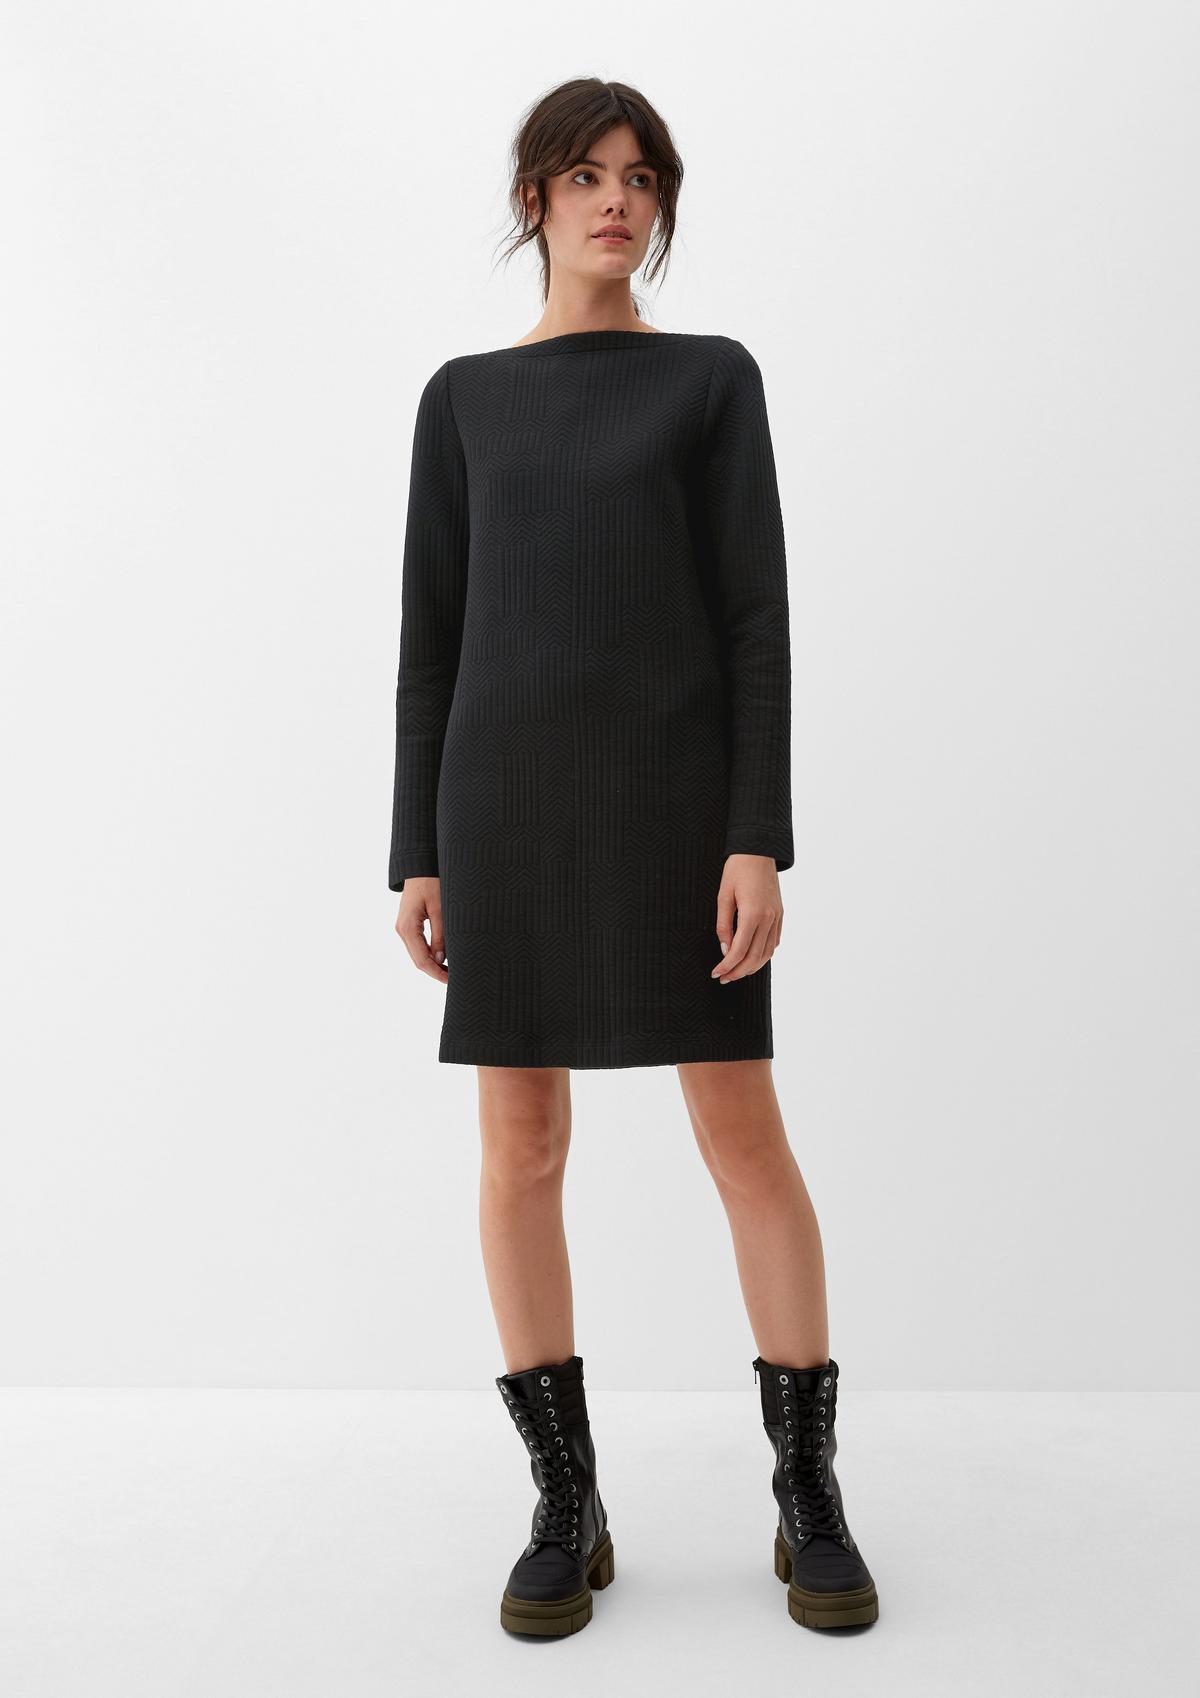 Black Cocoon Pocket dress, Ankle Boots and Printed Tights - What